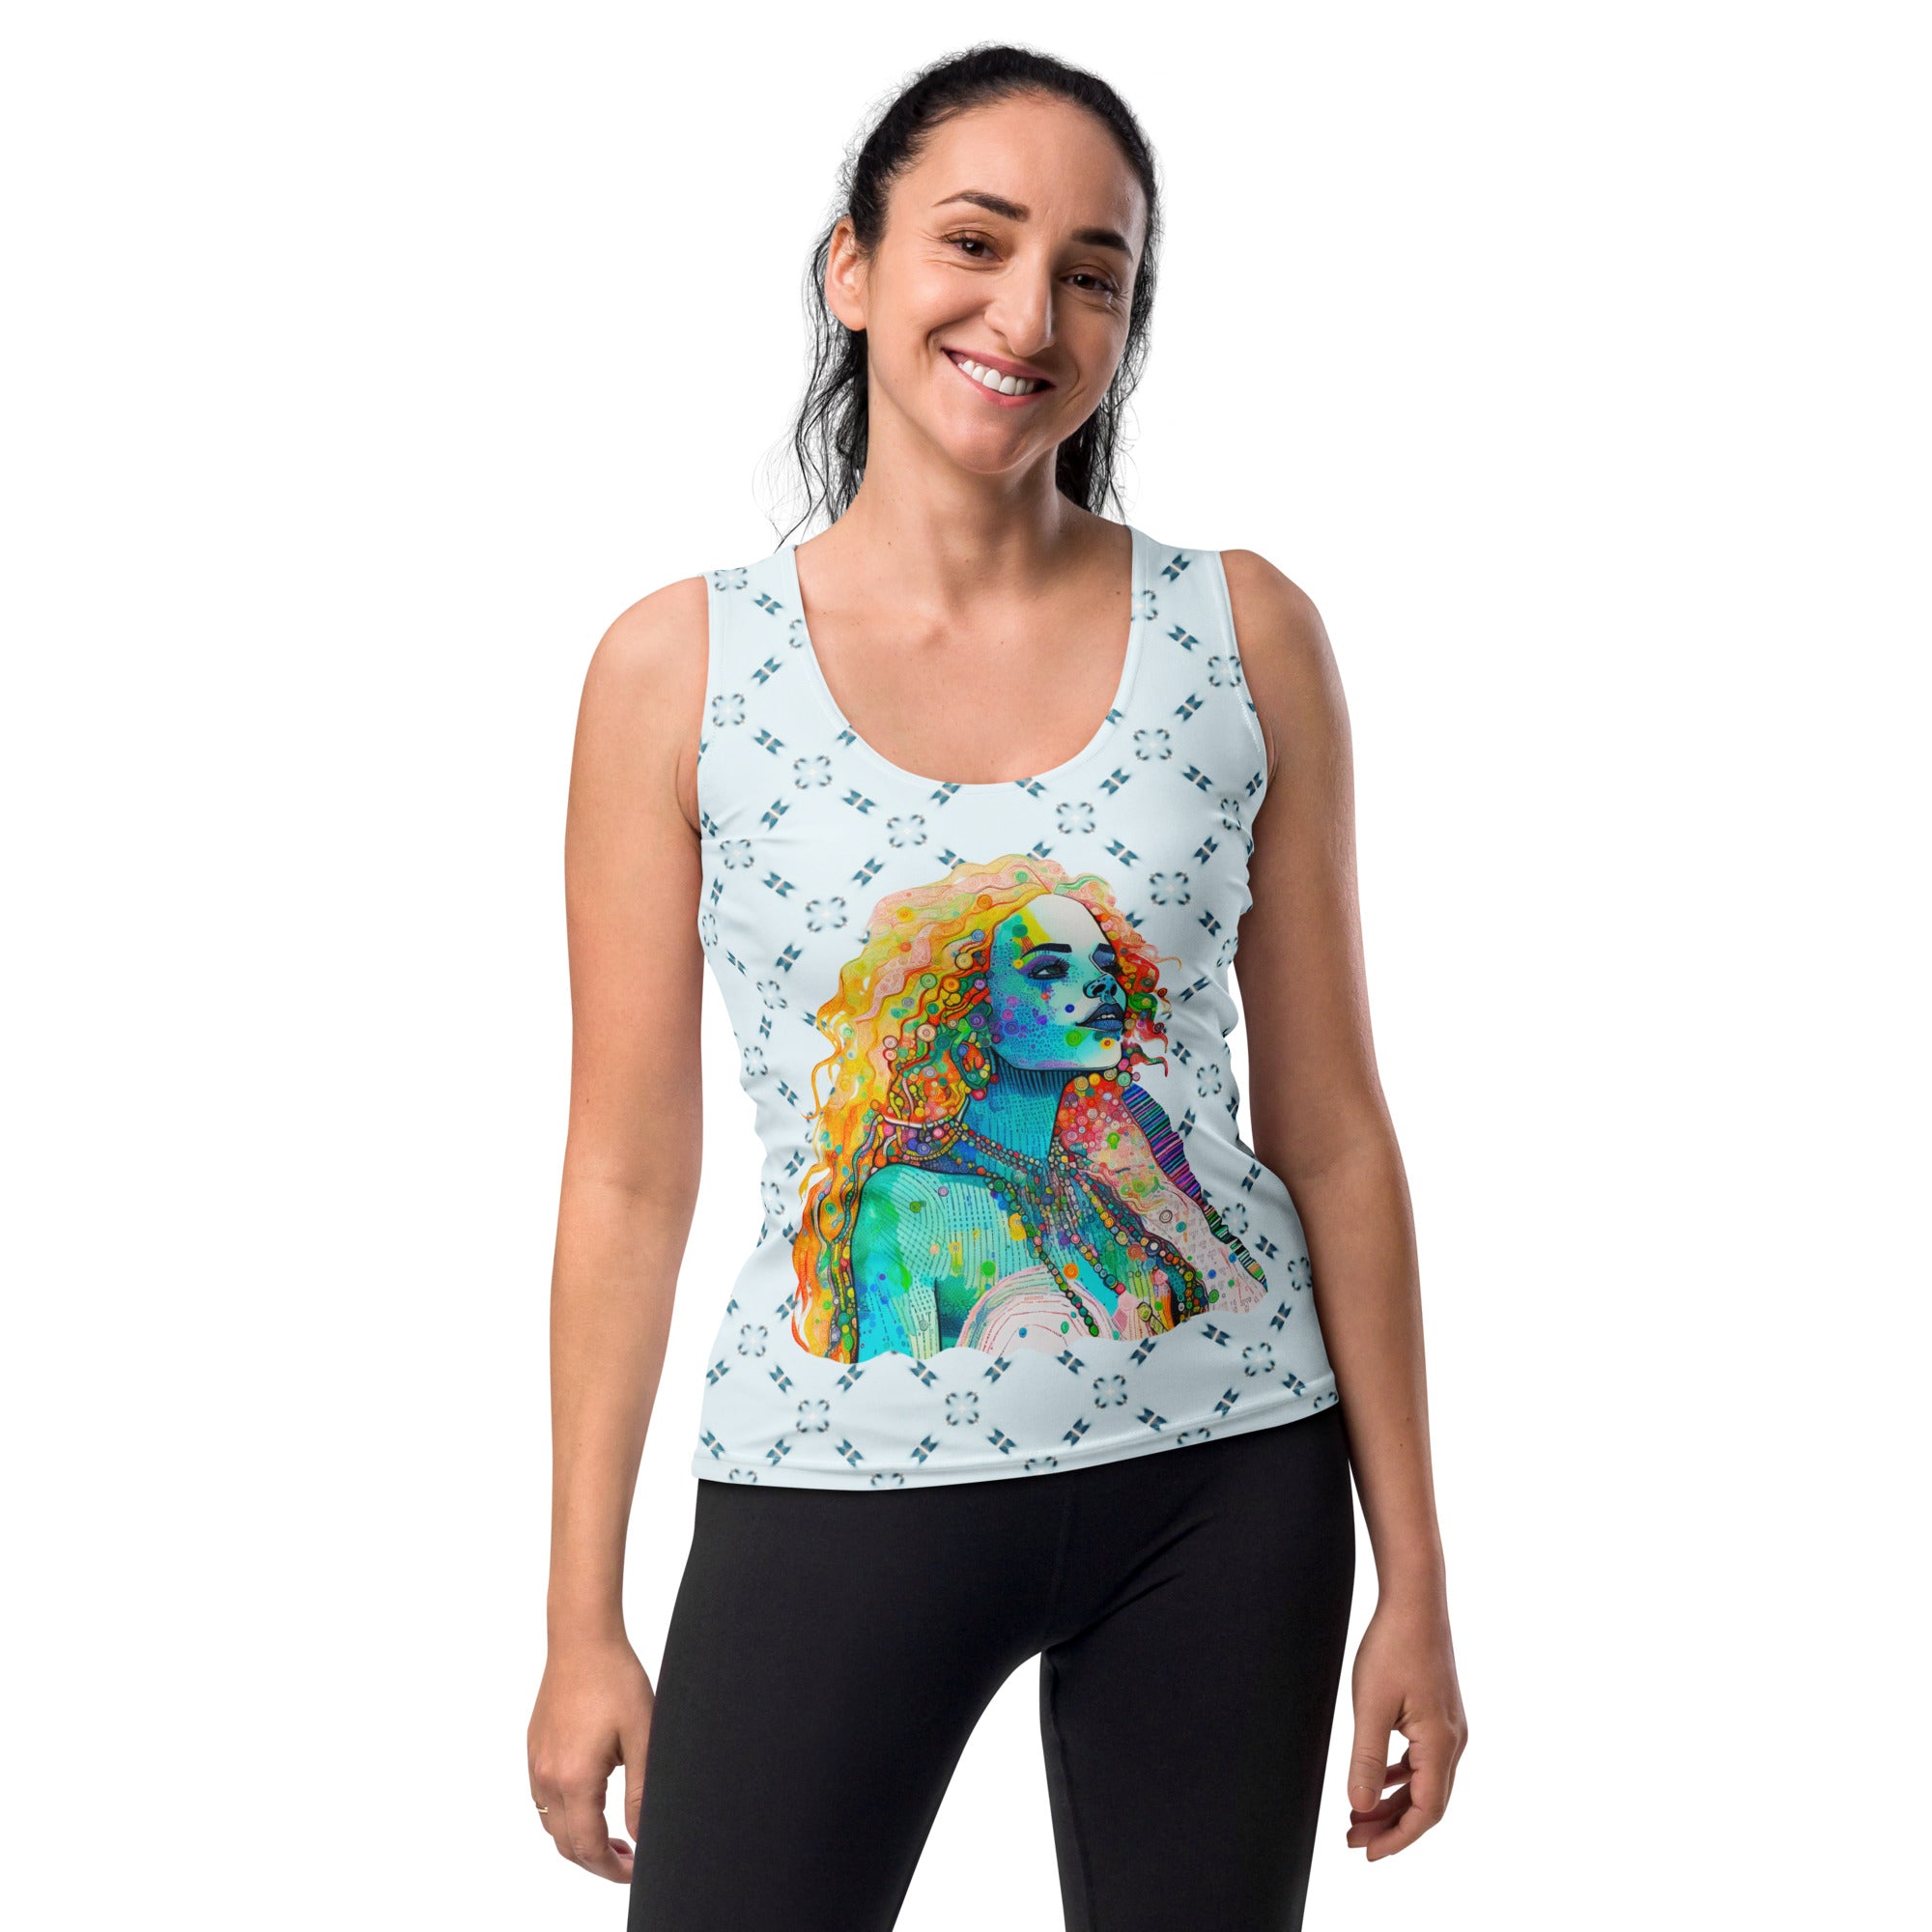 Blossoms Breeze Women's Tank Top on a clothing mannequin.